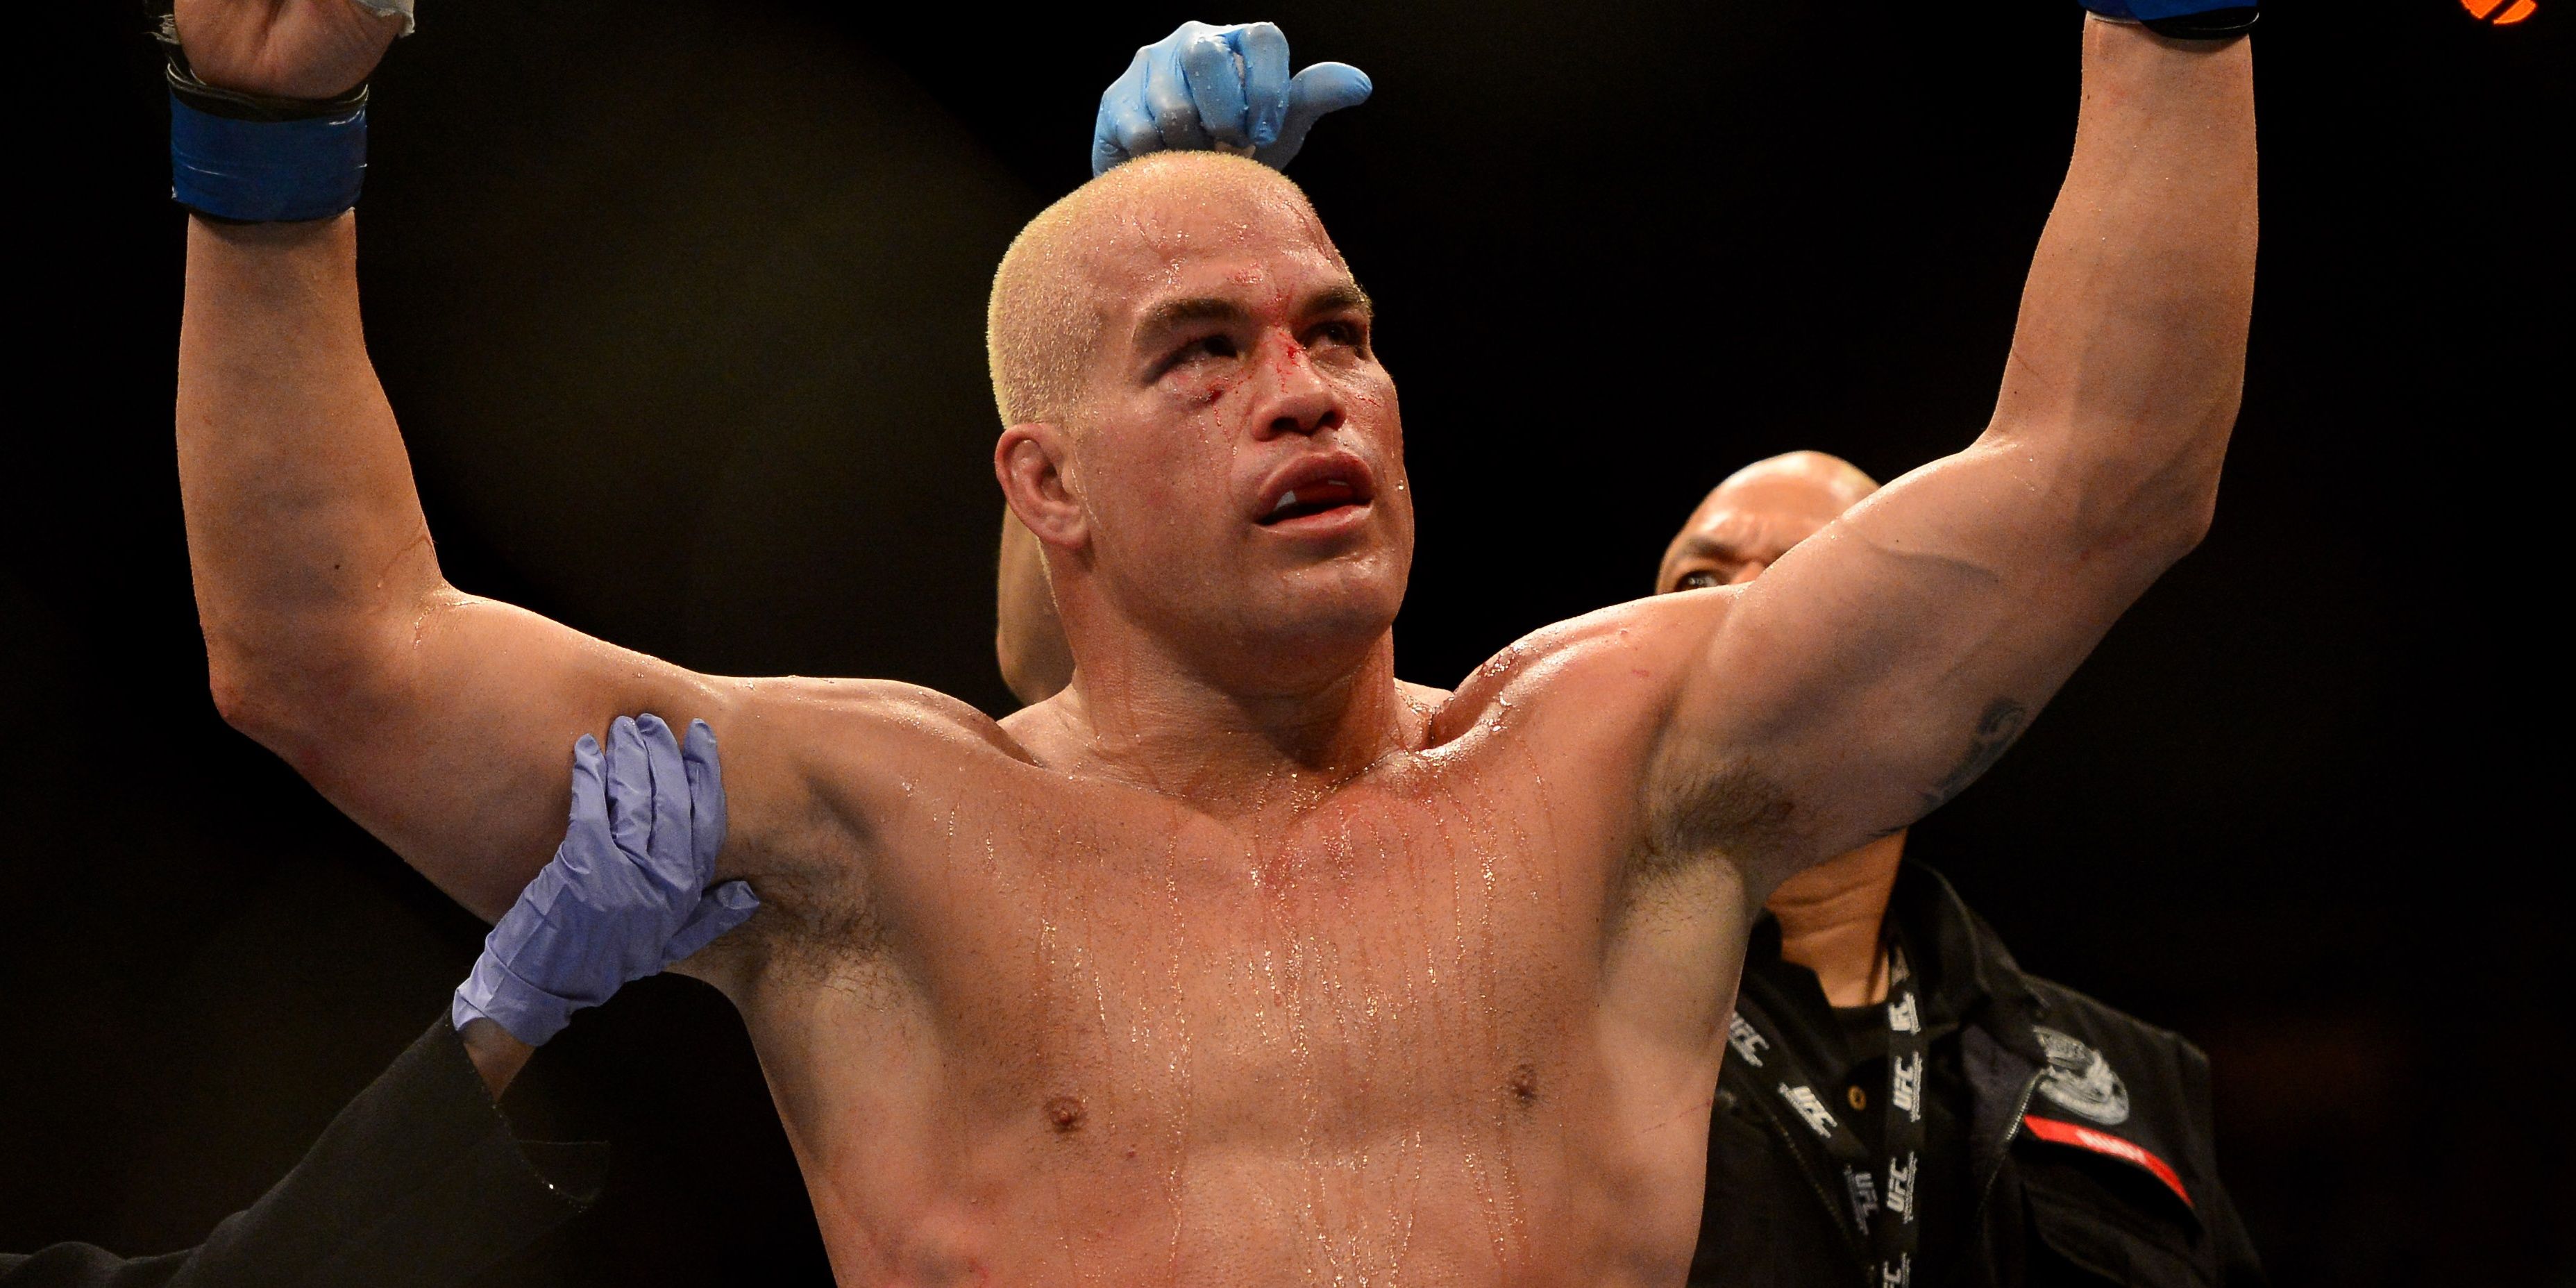 tito-ortiz-raising-hands-with-fingers-pointing-up